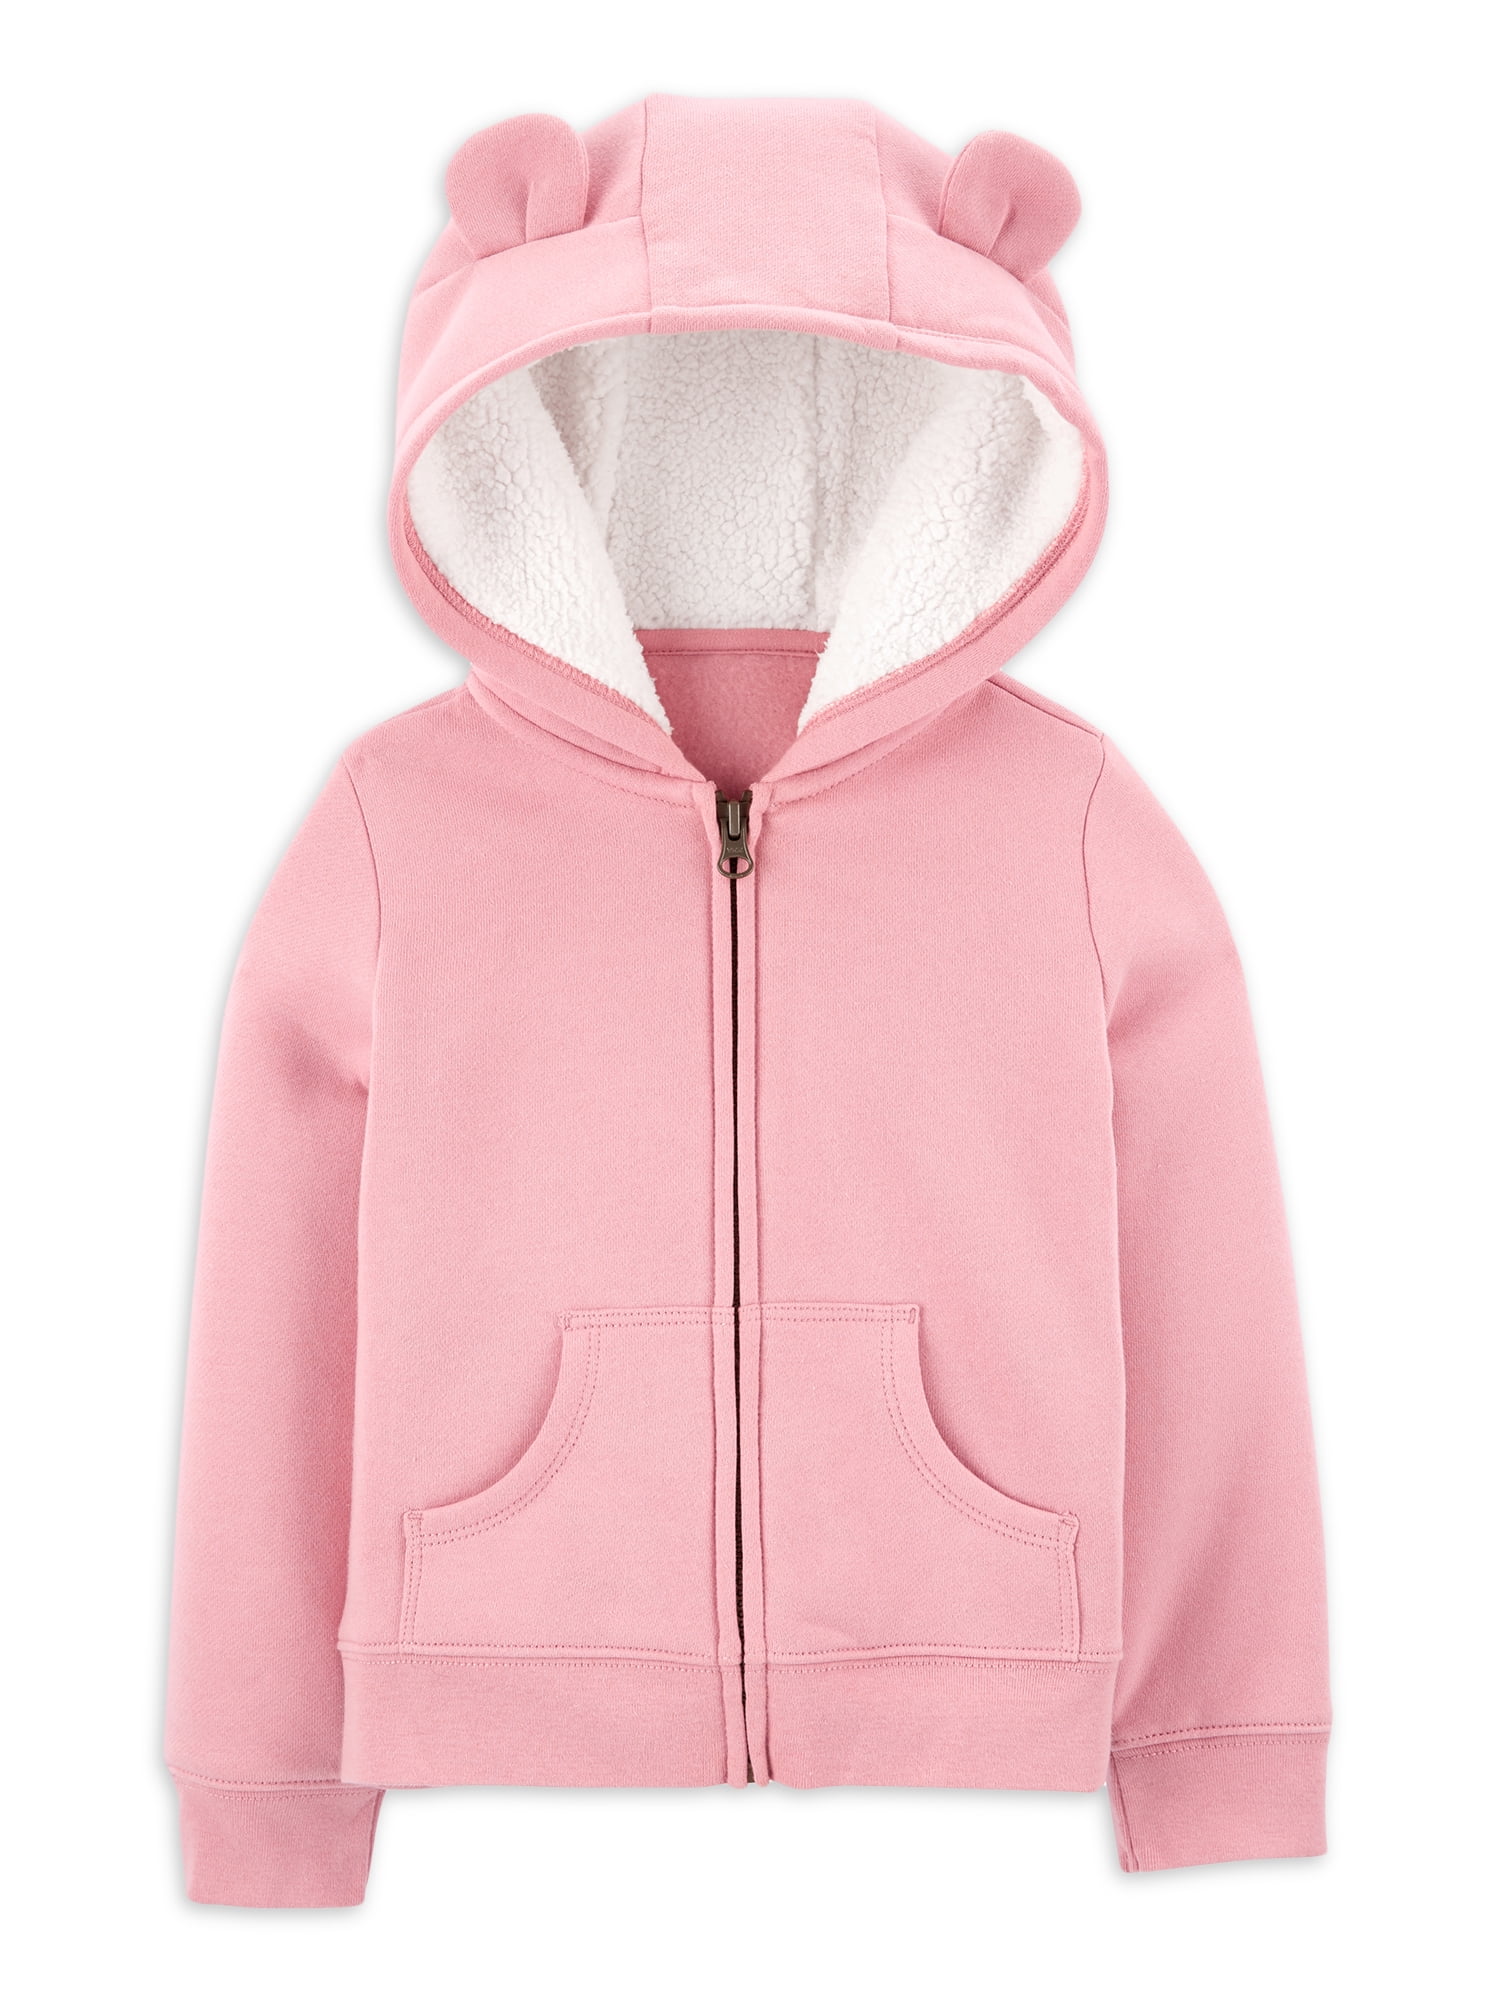 Details about   The Children's Place Baby Girl's Long Sleeve Velour Hoodie Pink Size Variations 